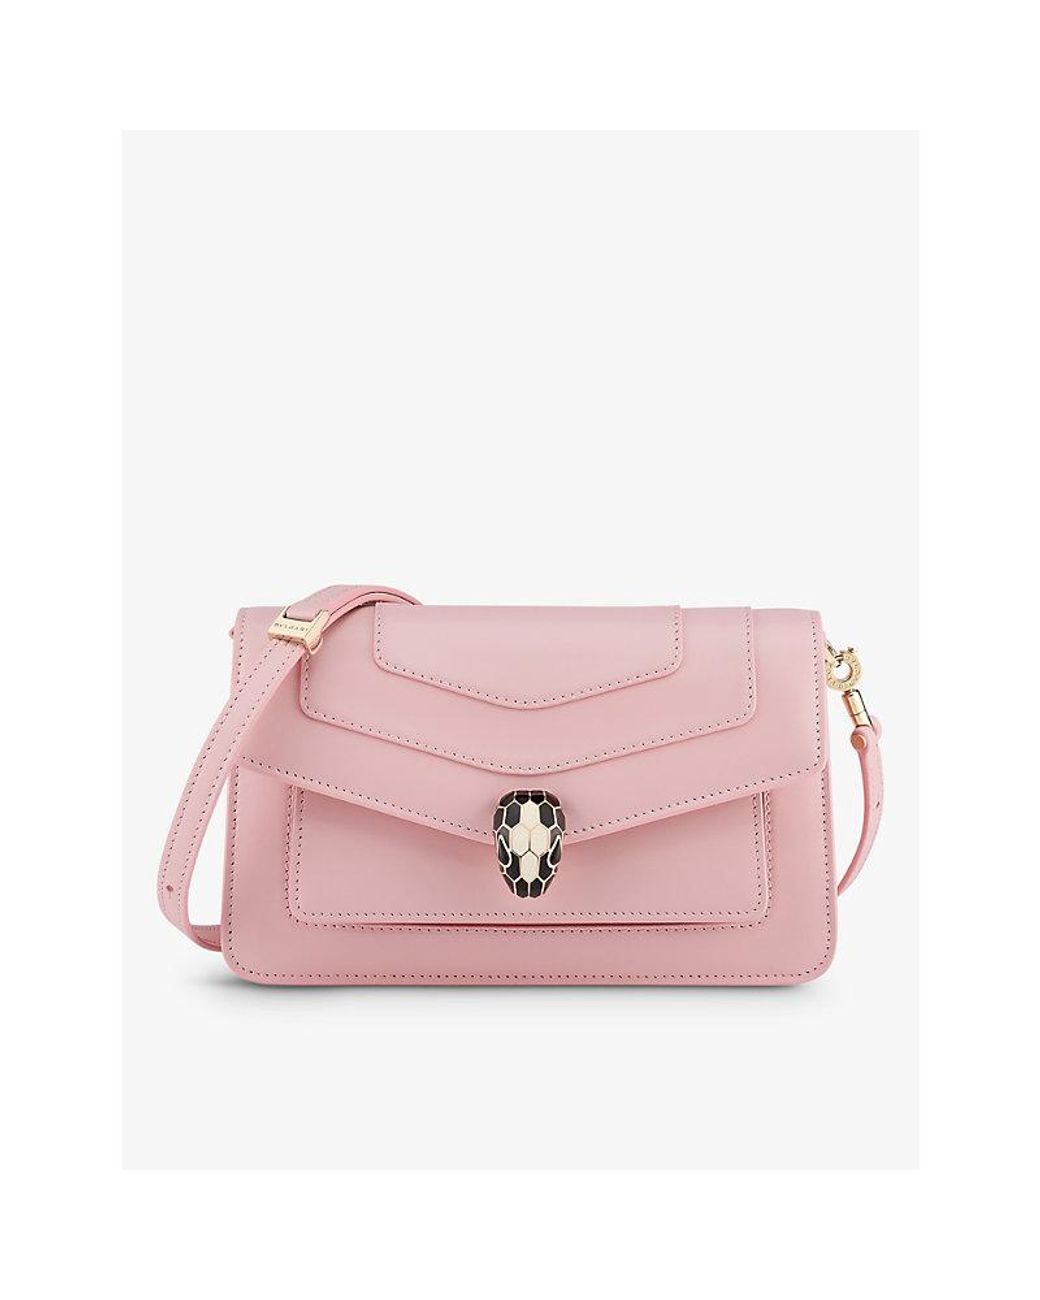 BVLGARI Serpenti Forever East-west Leather Shoulder Bag in Pink | Lyst